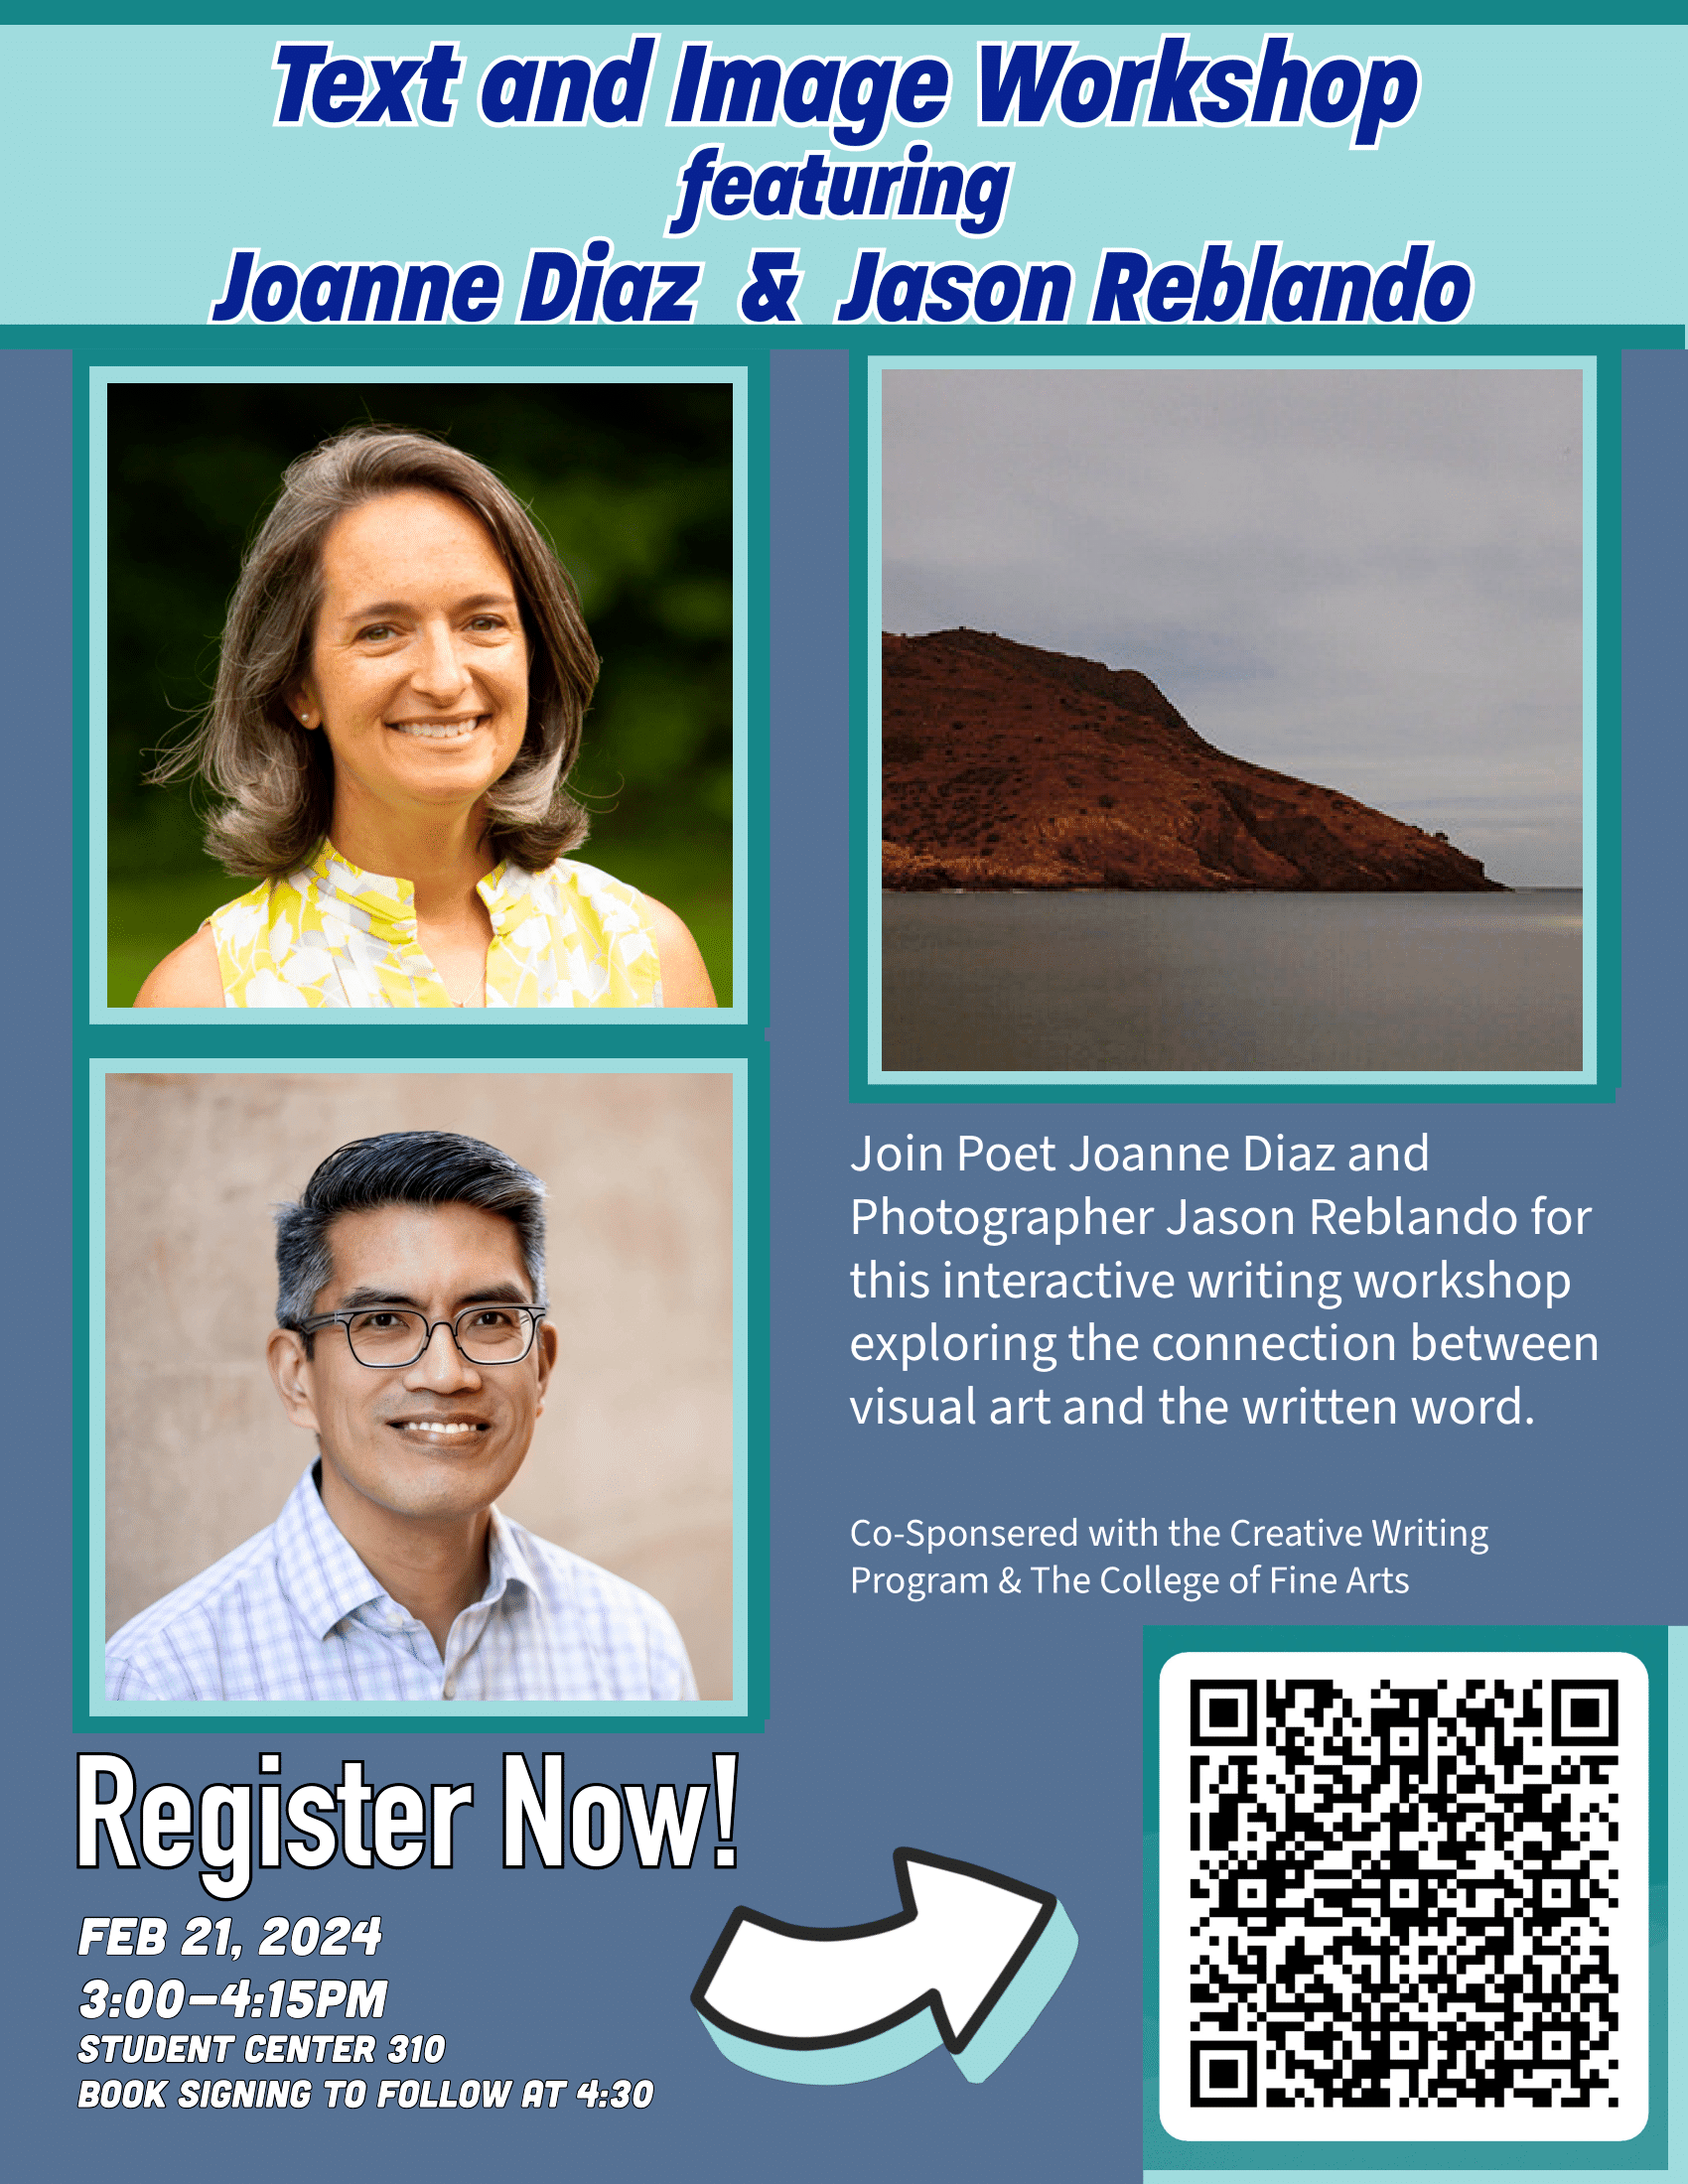 Poster advertising text and image workshop featuring Joanne Diaz and Jason Reblando. The poster includes headshots of Diaz and Reblando, as well as a photograph and a QR code to register for the workshop.